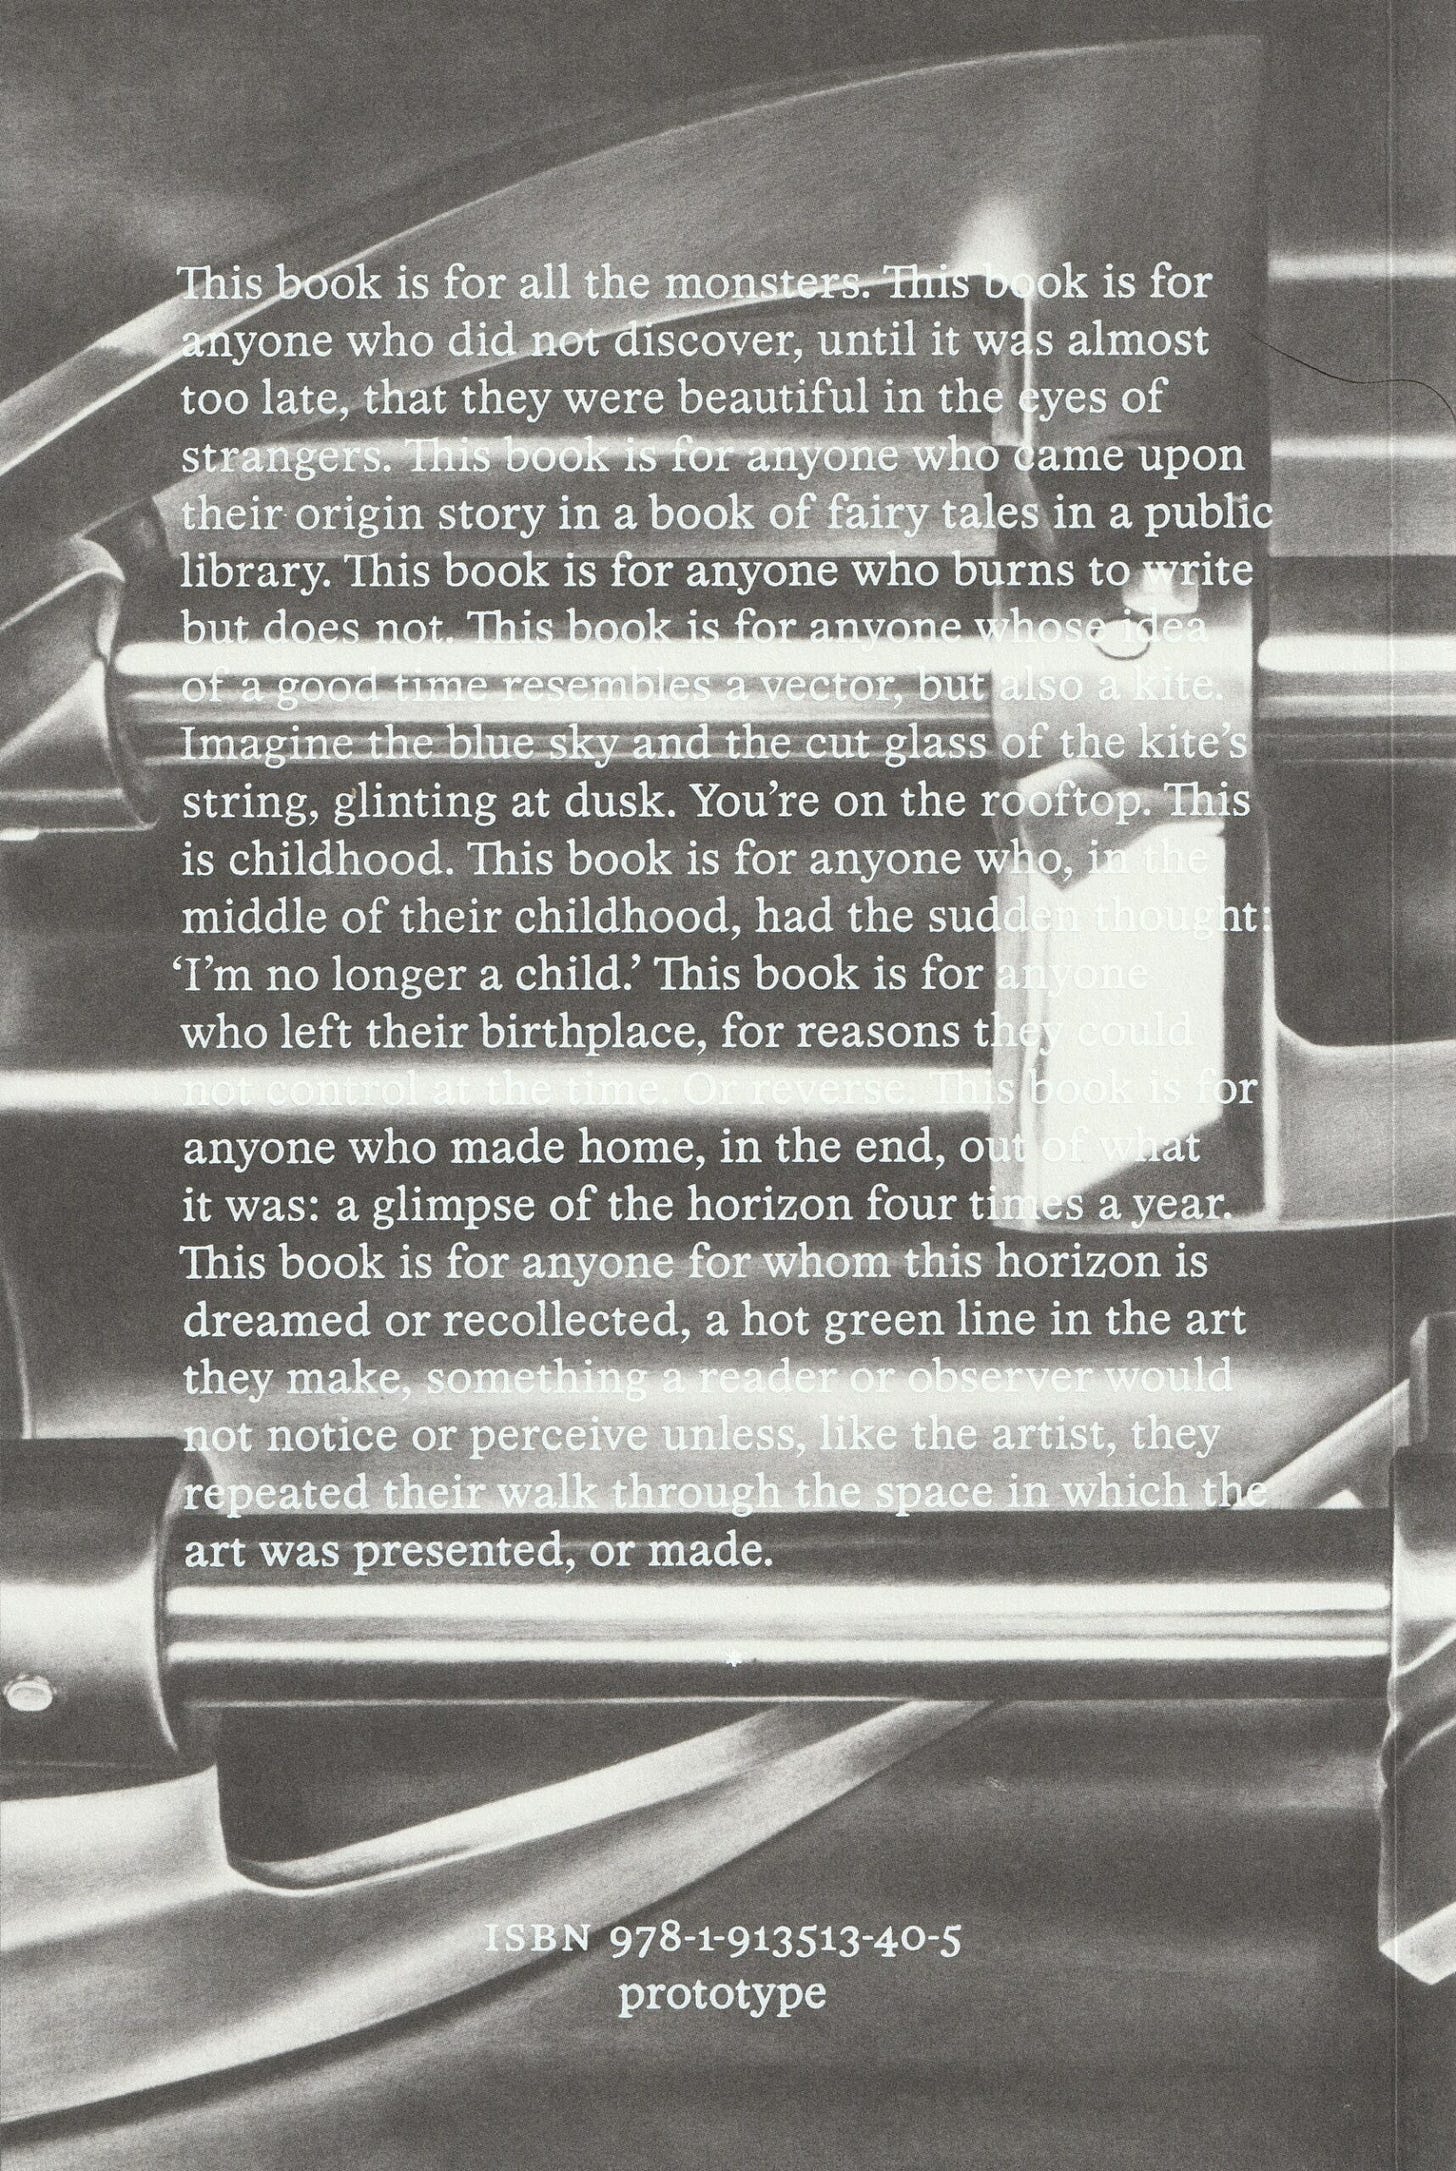 Back cover of Prototype edition of Incubation, featuring text beginning "This book is for all the monsters".